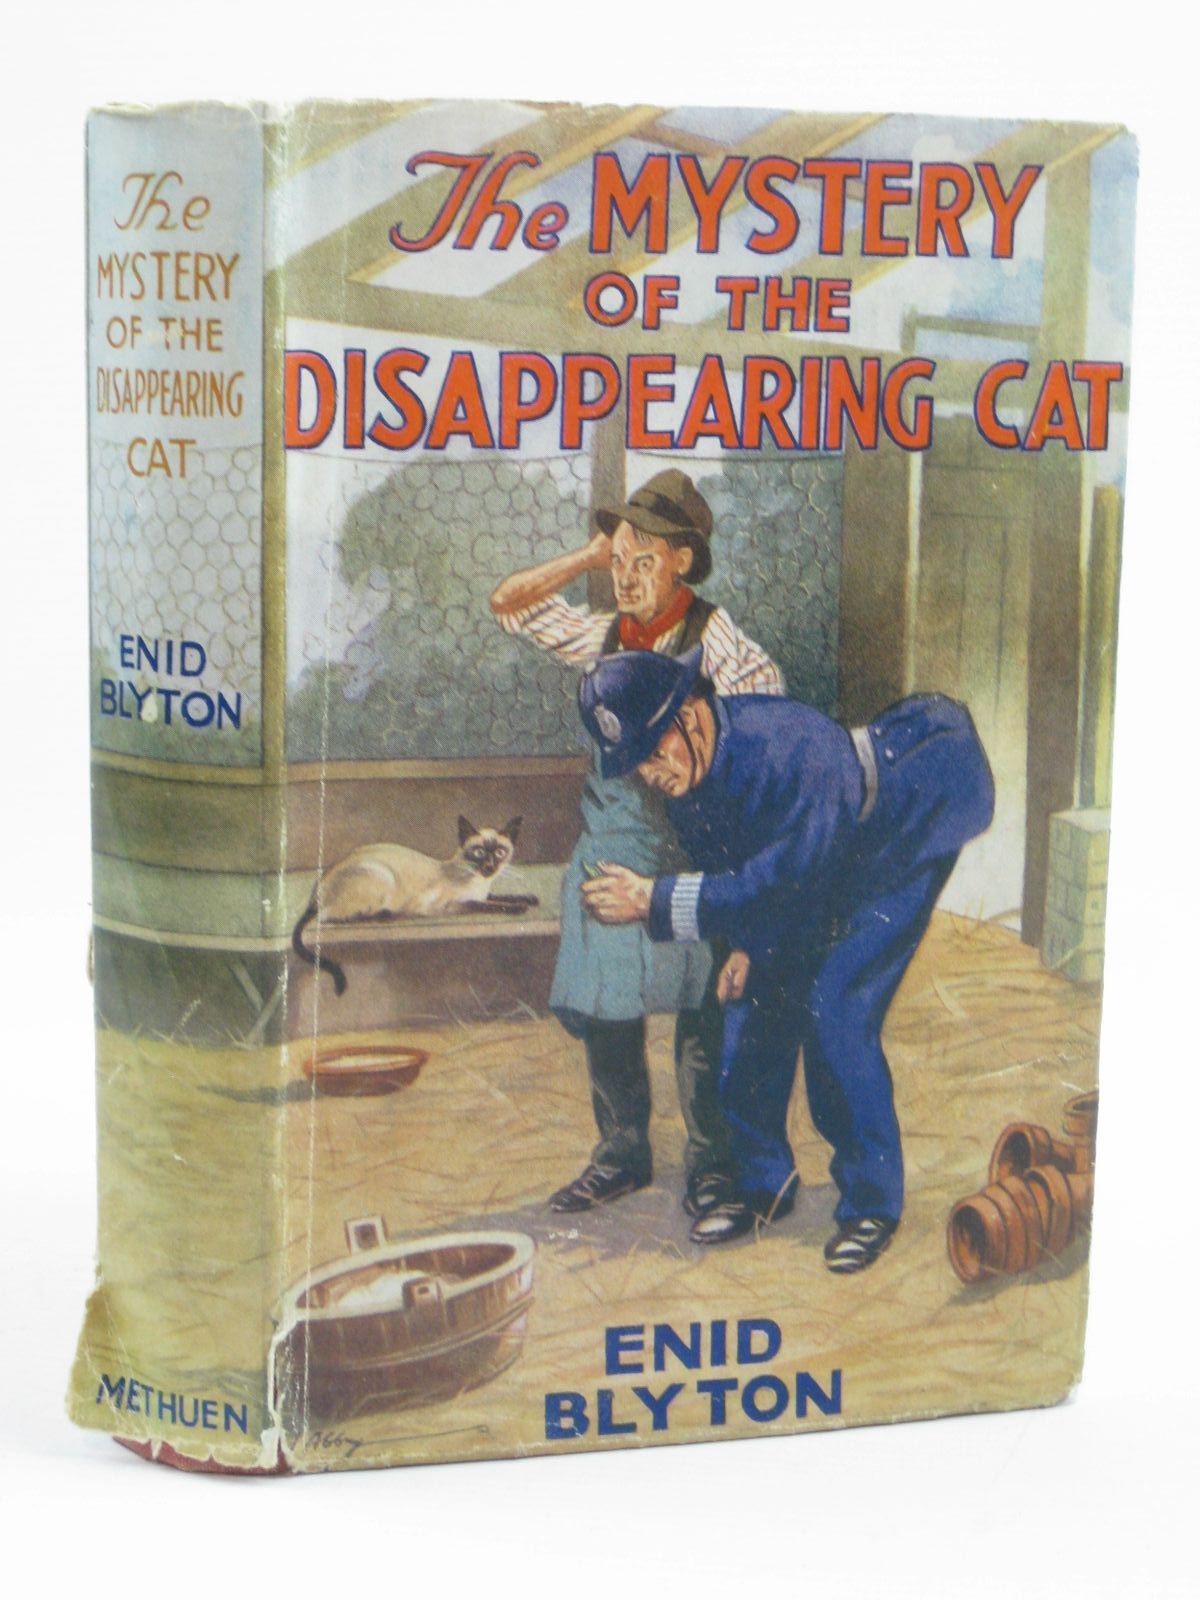 Cover of THE MYSTERY OF THE DISAPPEARING CAT by Enid Blyton